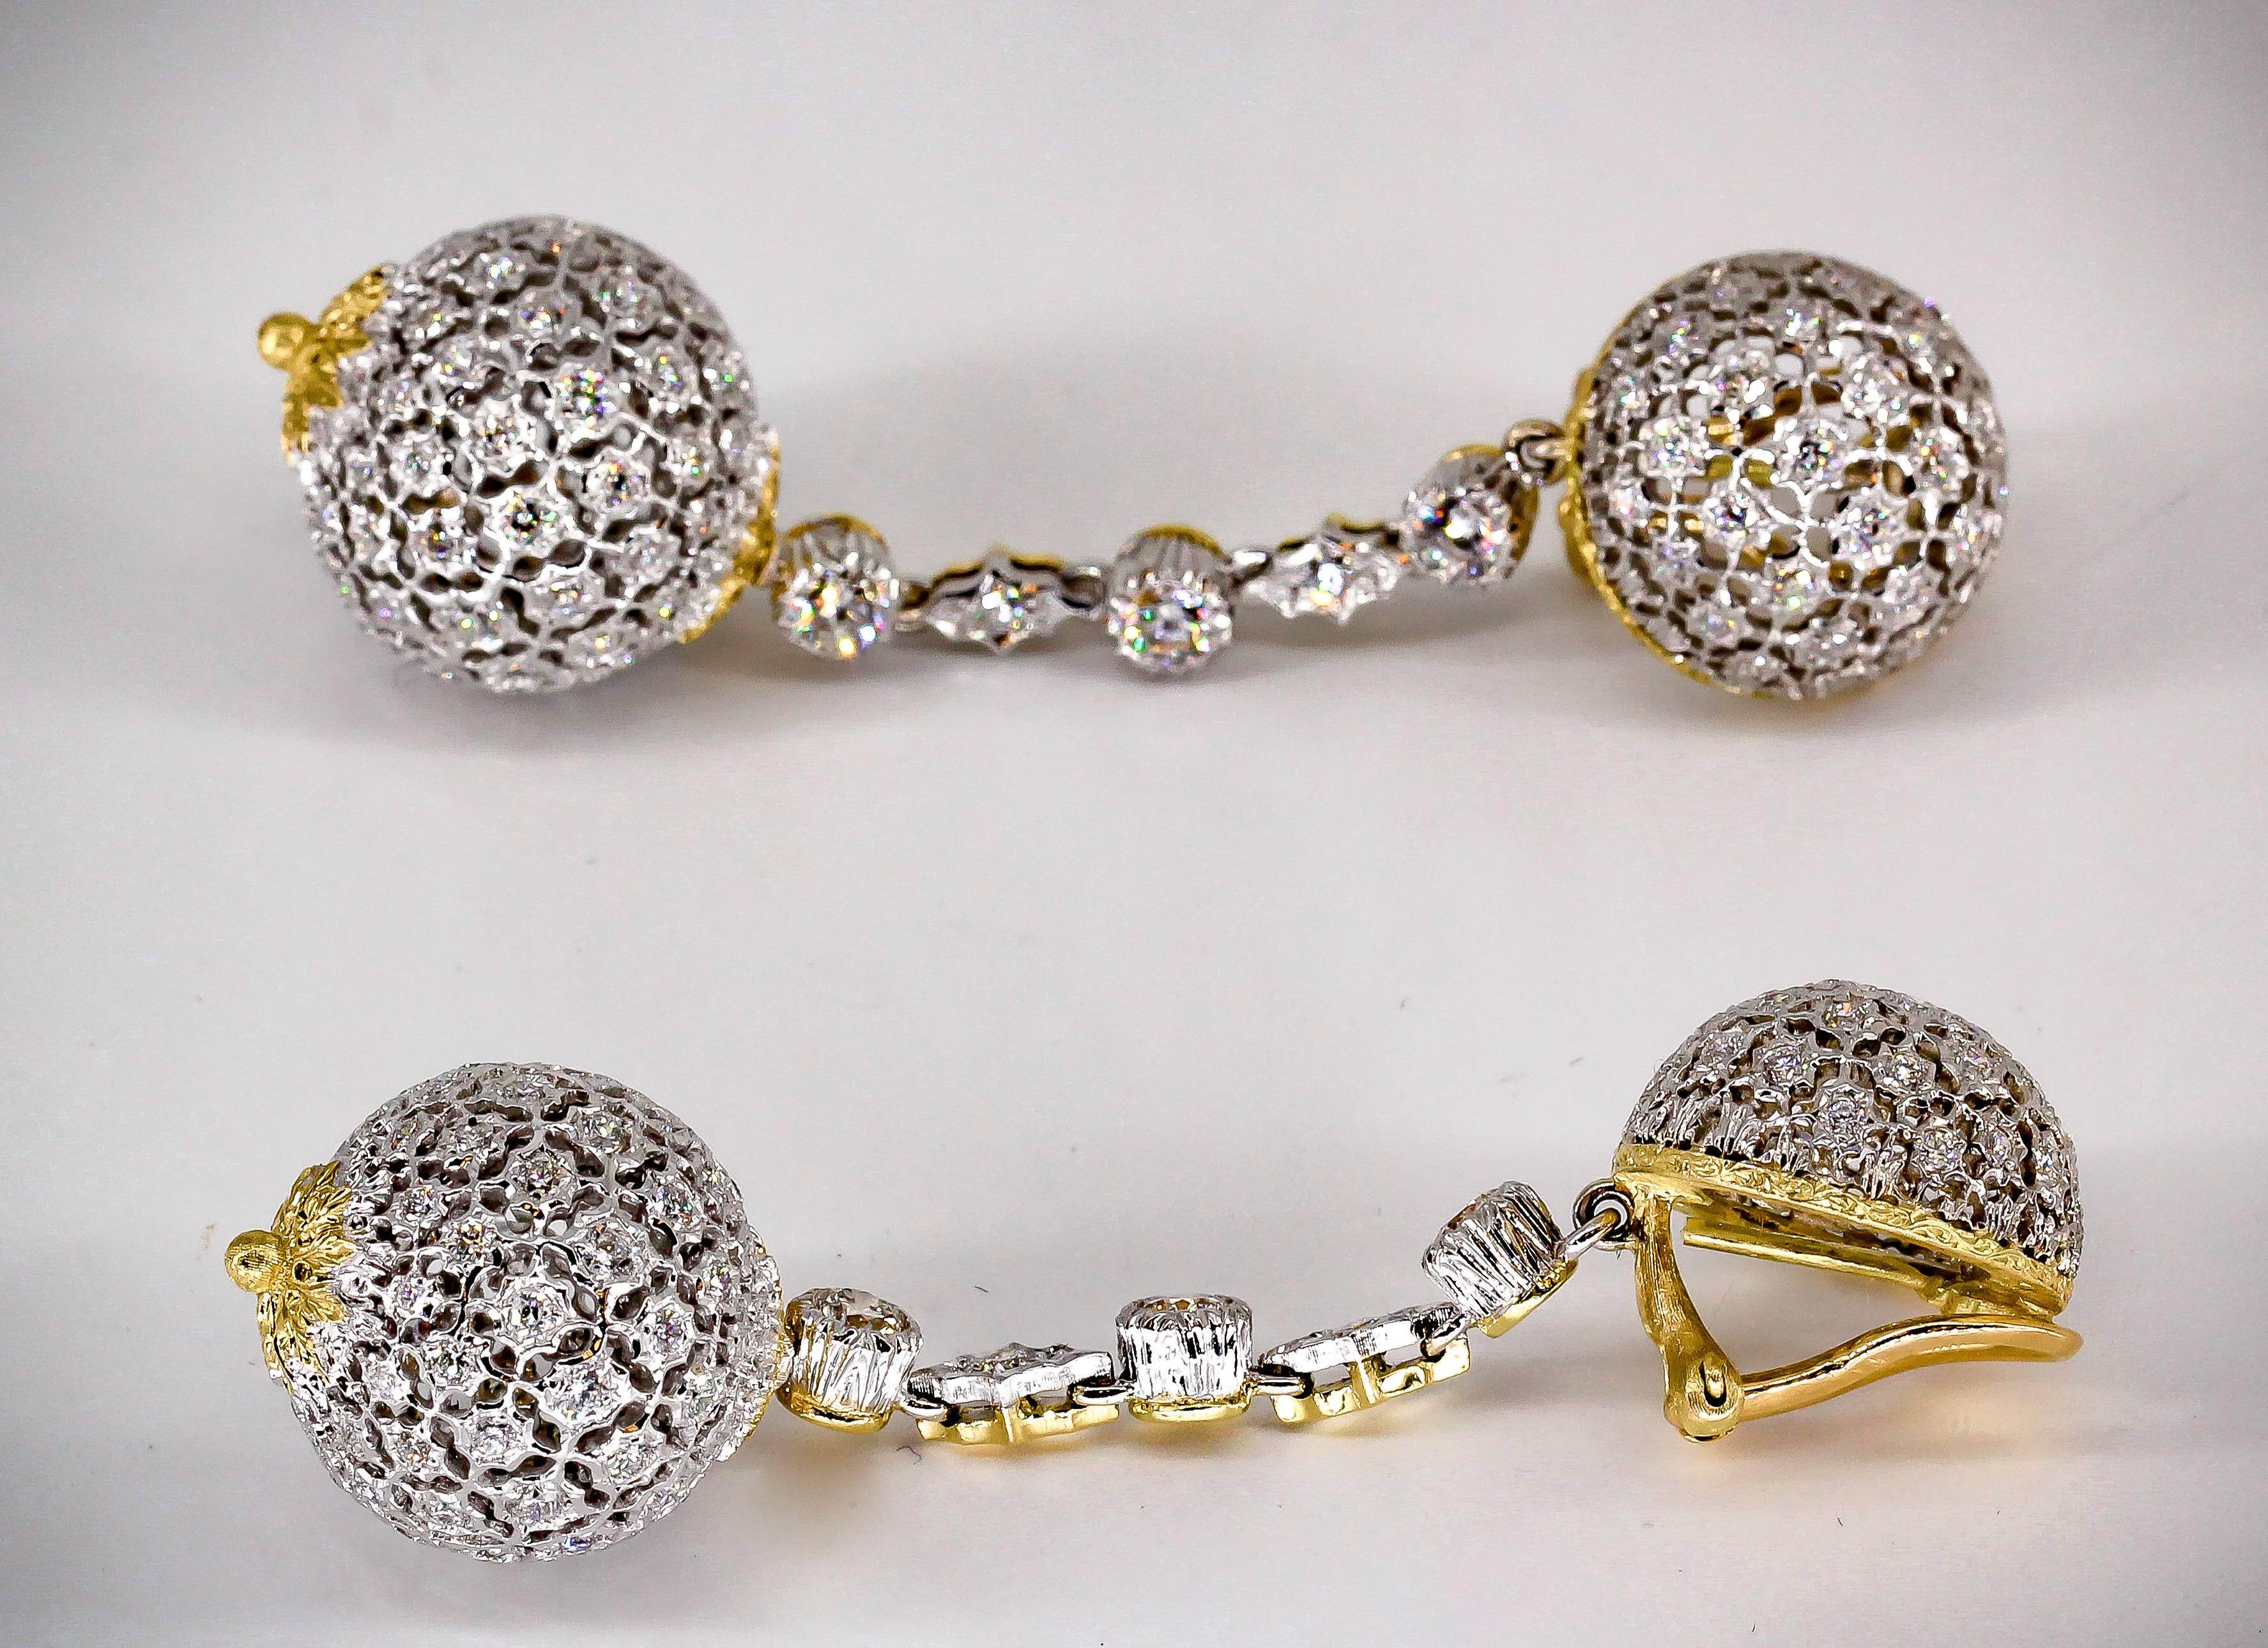 Stylish diamond and 18K yellow gold earring pendants by Mario Buccellati, circa 1950s-60s. They feature high grade round brilliant cut diamonds throughout, and are in the shape of two spheres held together by a thin string of diamonds set in 18K